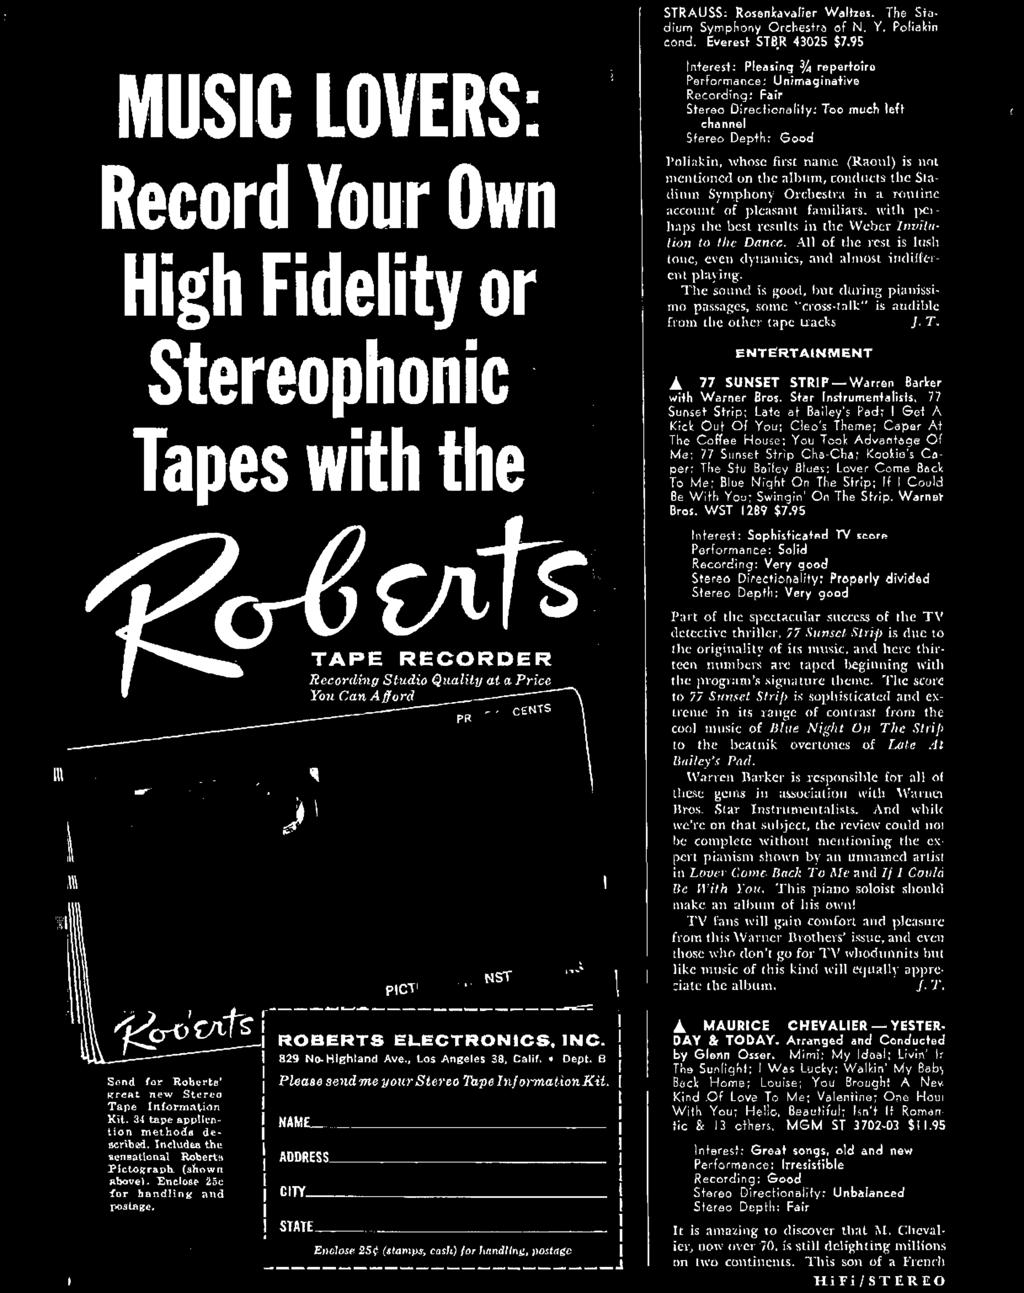 Enclose 25c 'for handling and postage. ROBERTS ELECTRONICS, INC. 829 No. Highland Ave., Los Angeles 38, Calif. Dept. B Please send me your Ste1'eo Tape Inf01'mation Kit.